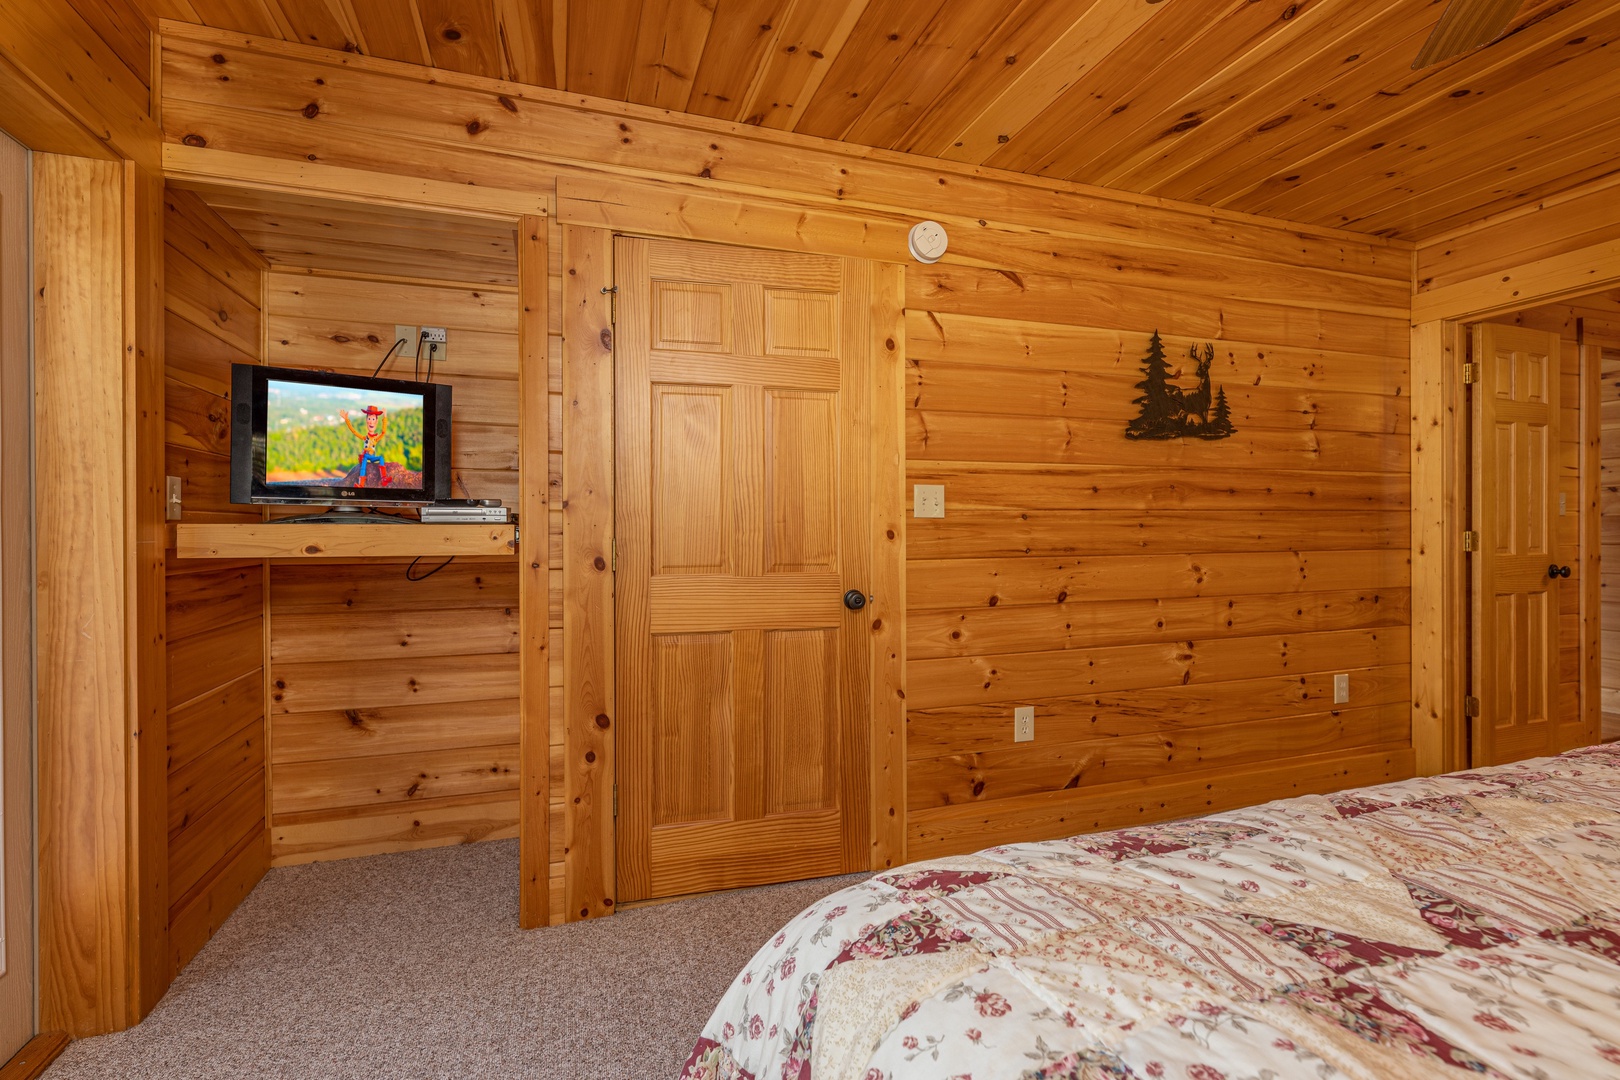 Bedroom with a TV at Sensational Views, a 3 bedroom cabin rental located in Gatlinburg